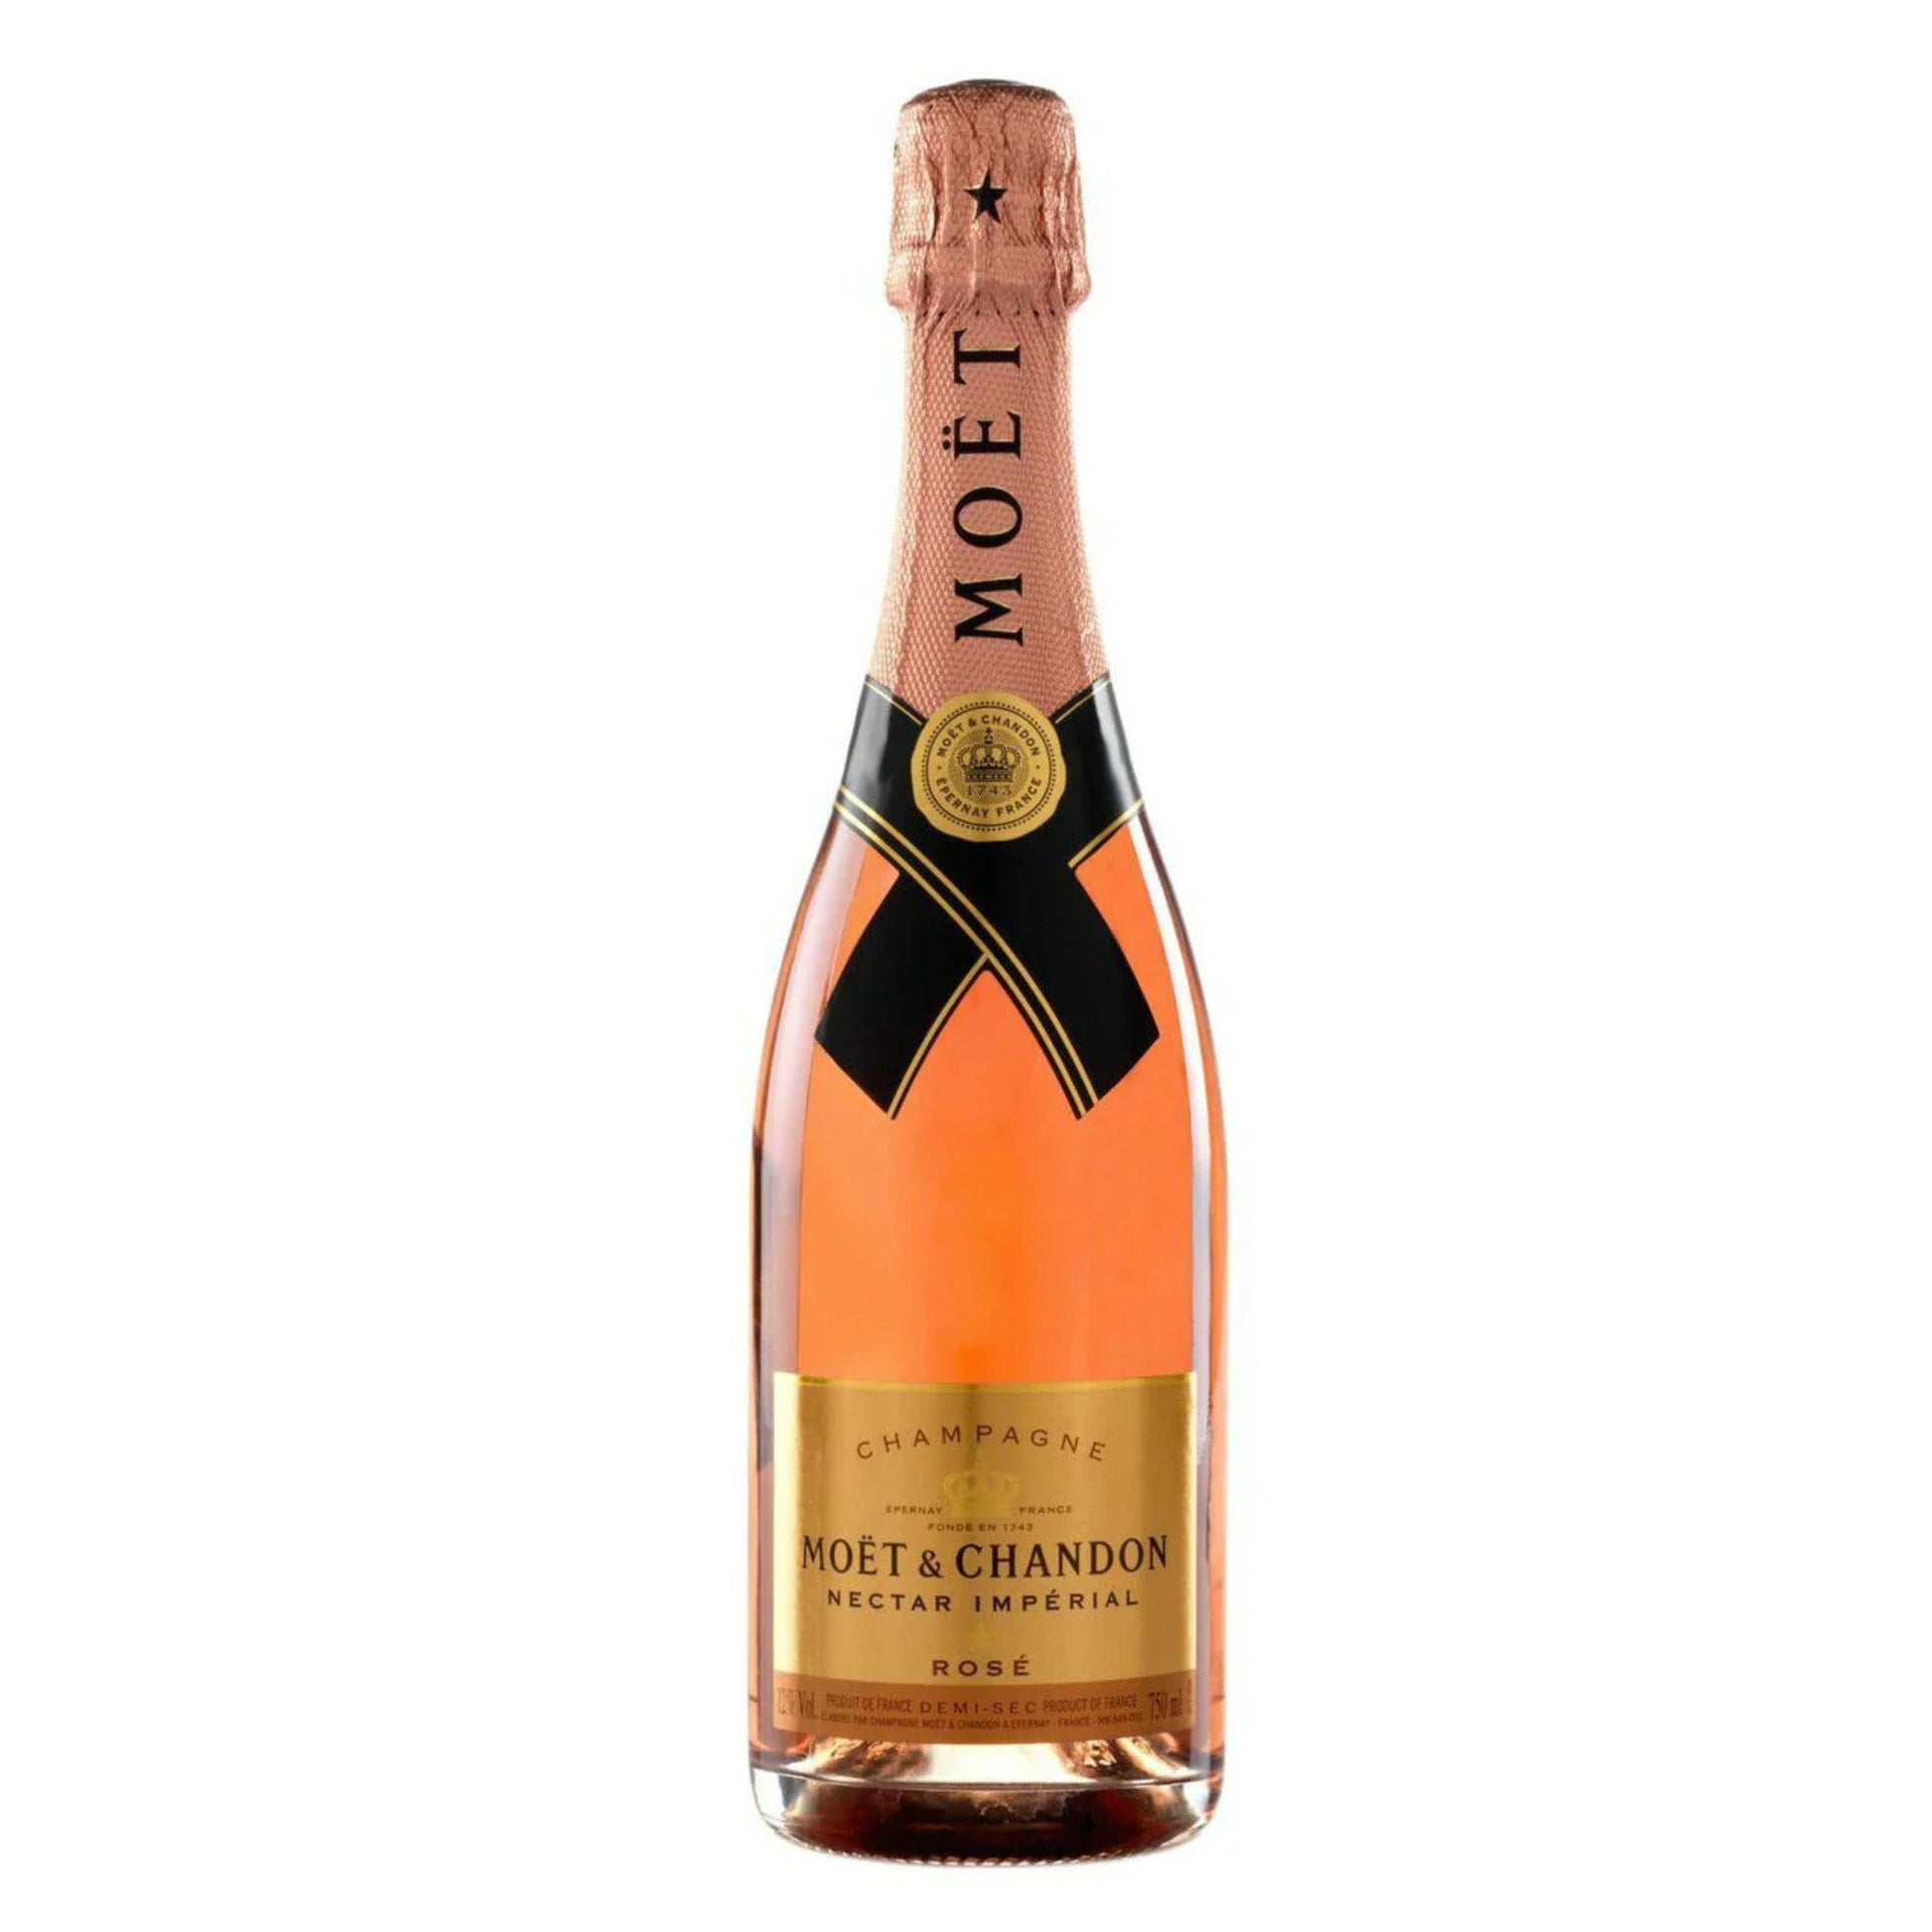 Moet & Chandon Nectar Imperial Rose Champagne - Liquor Geeks